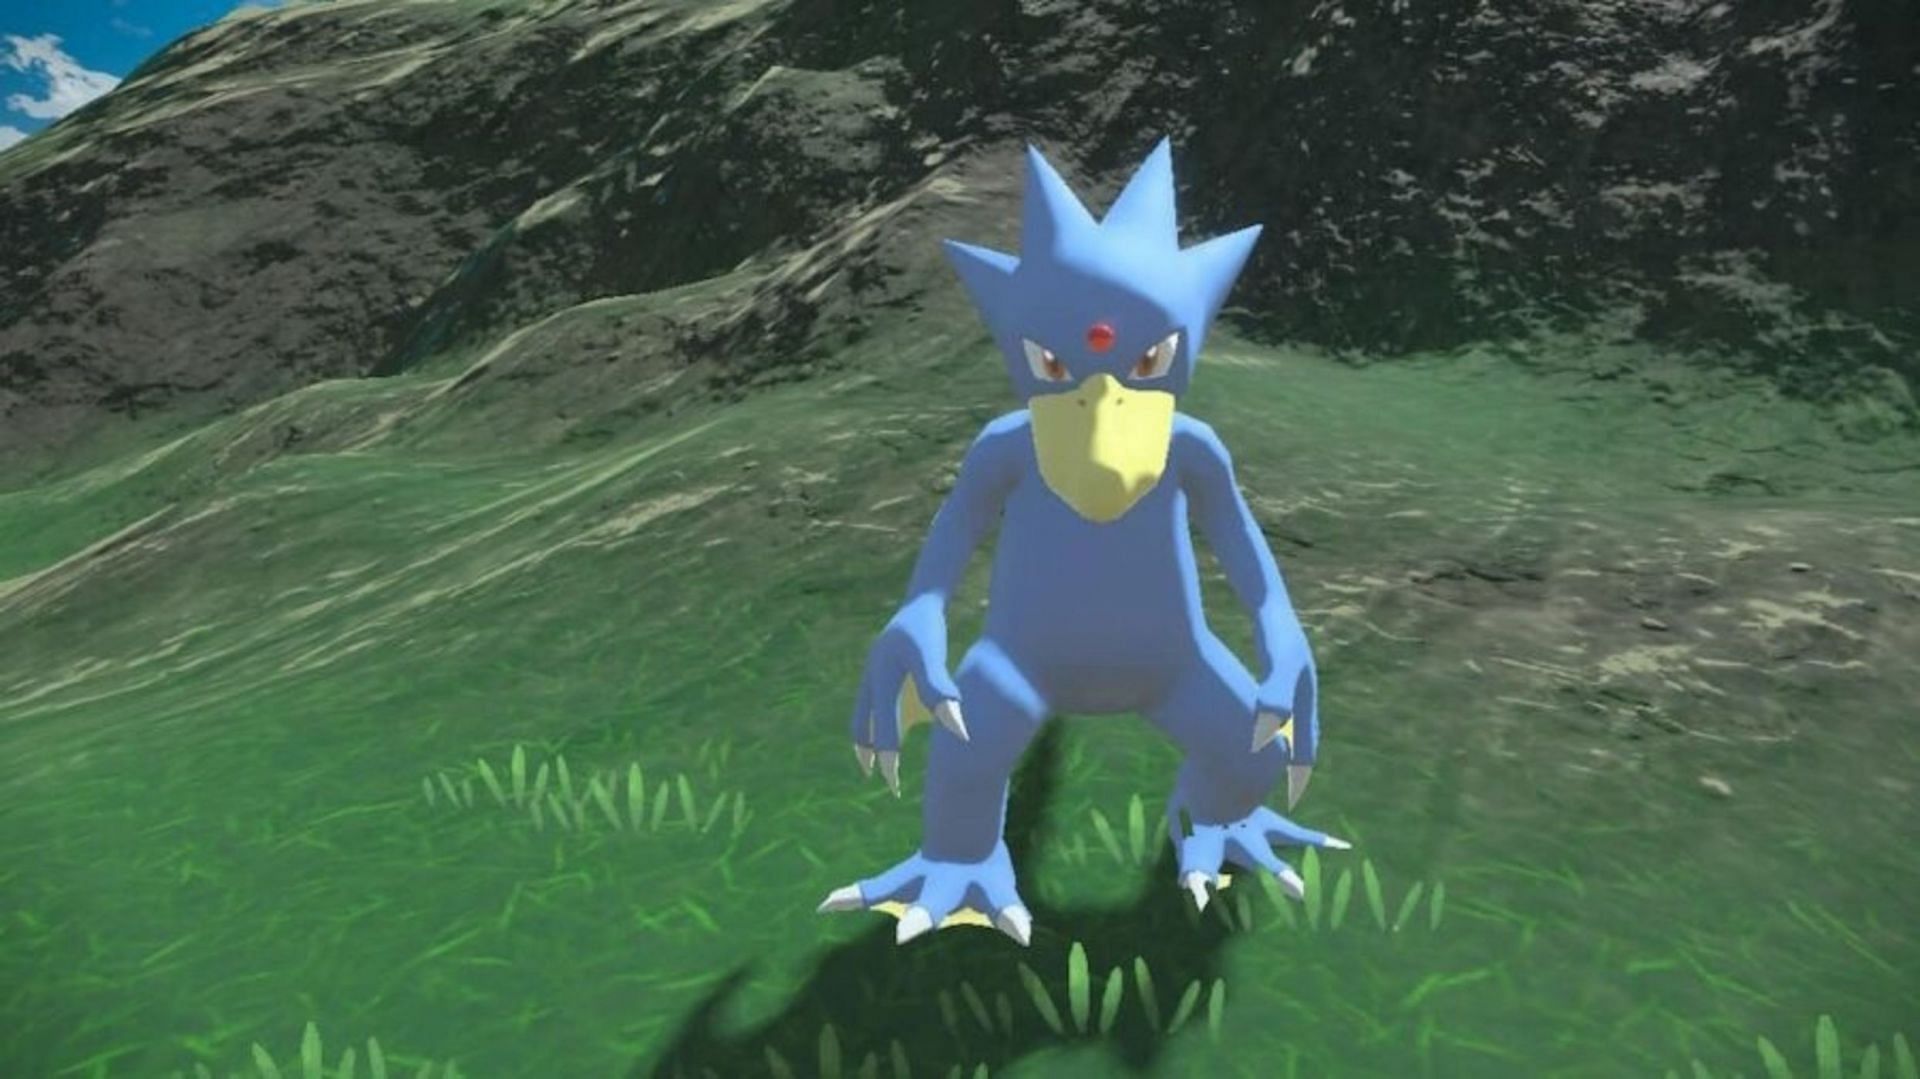 Golduck sports higher stats and improved moves over Psyduck in Pokemon Legends: Arceus (Image via The Pokemon Company)